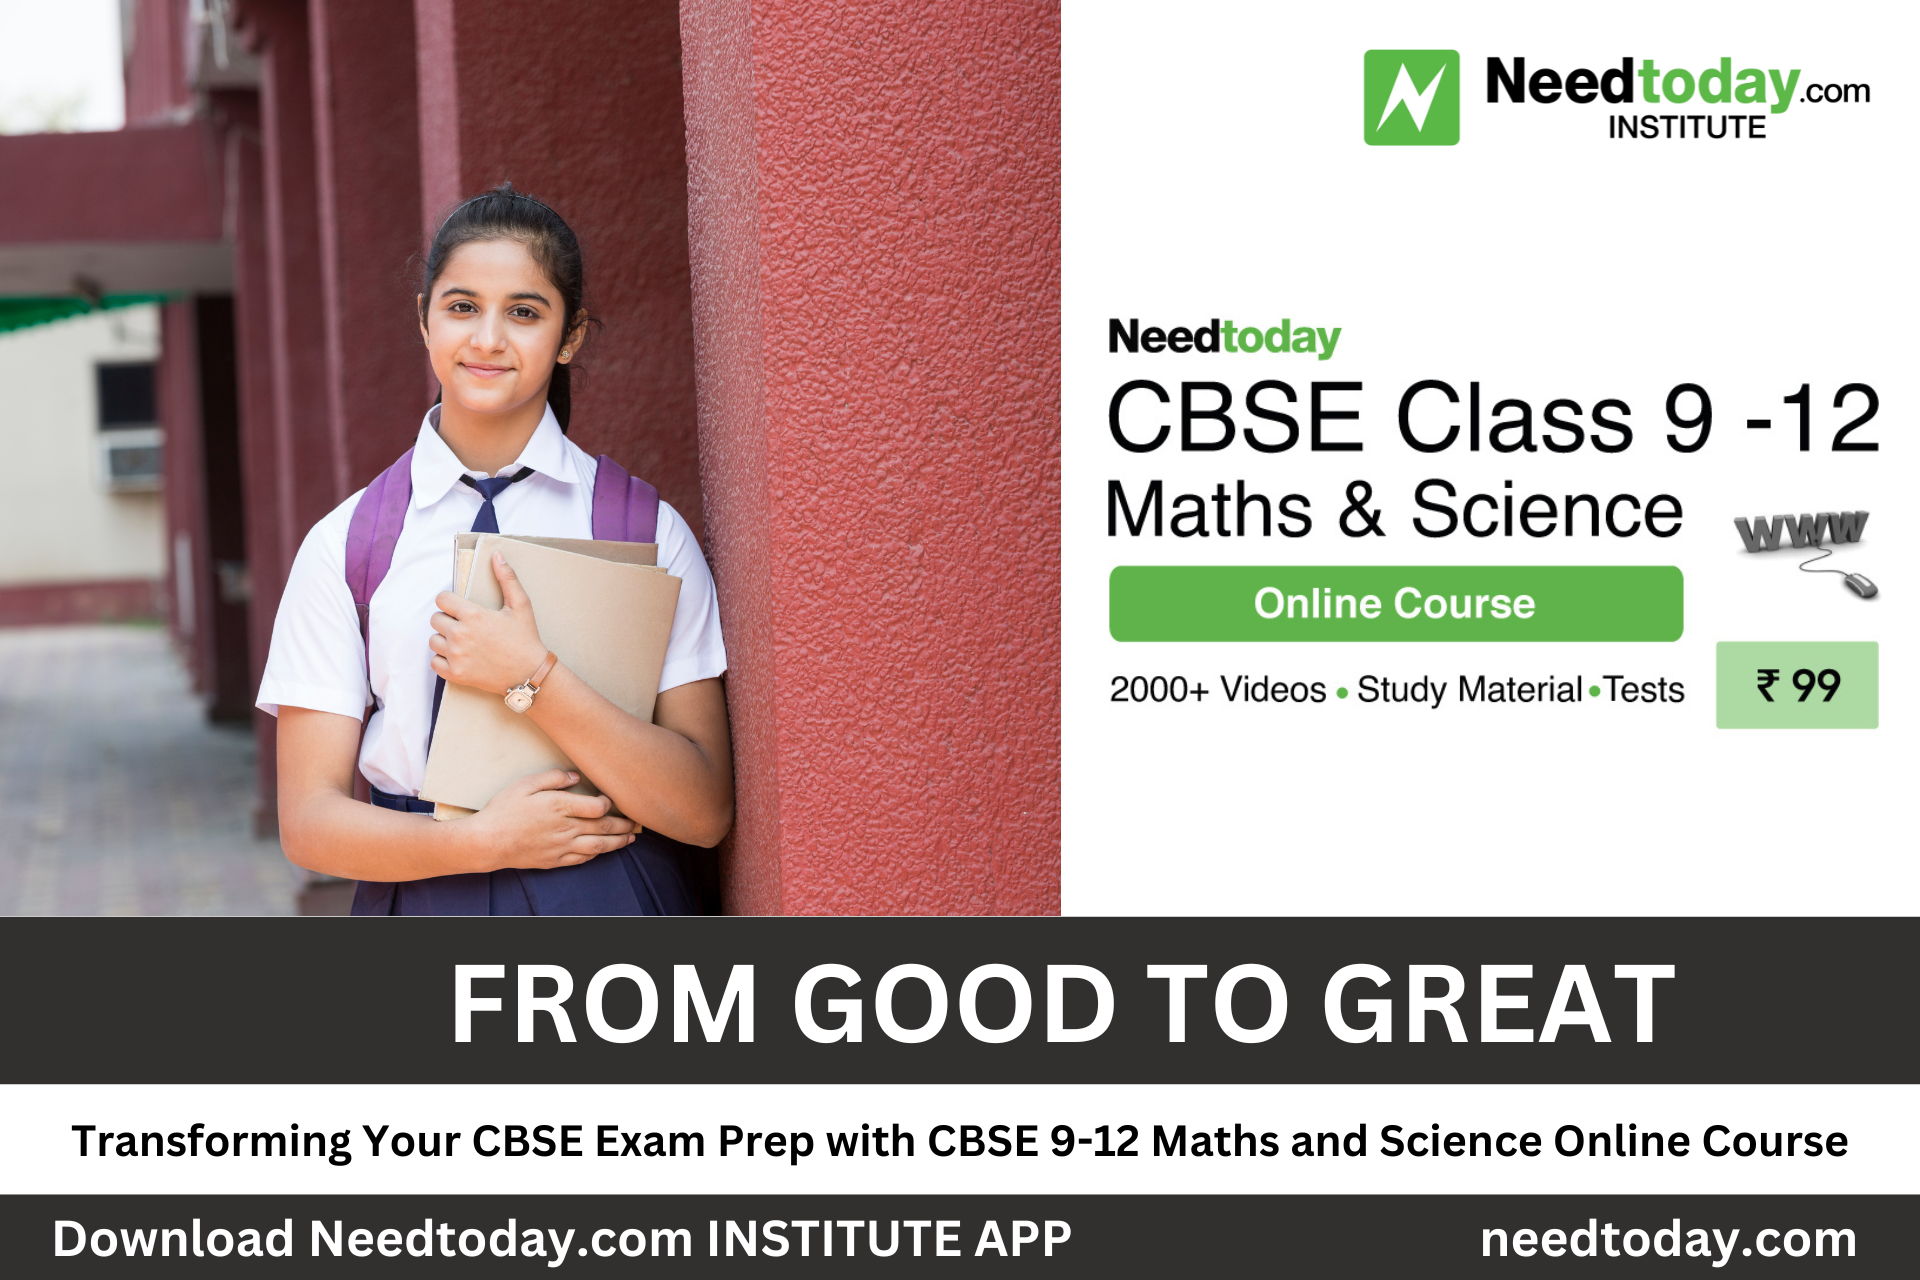 From Good to Great: Transforming Your CBSE Exam Prep with CBSE 9-12 Math and Science Online Course